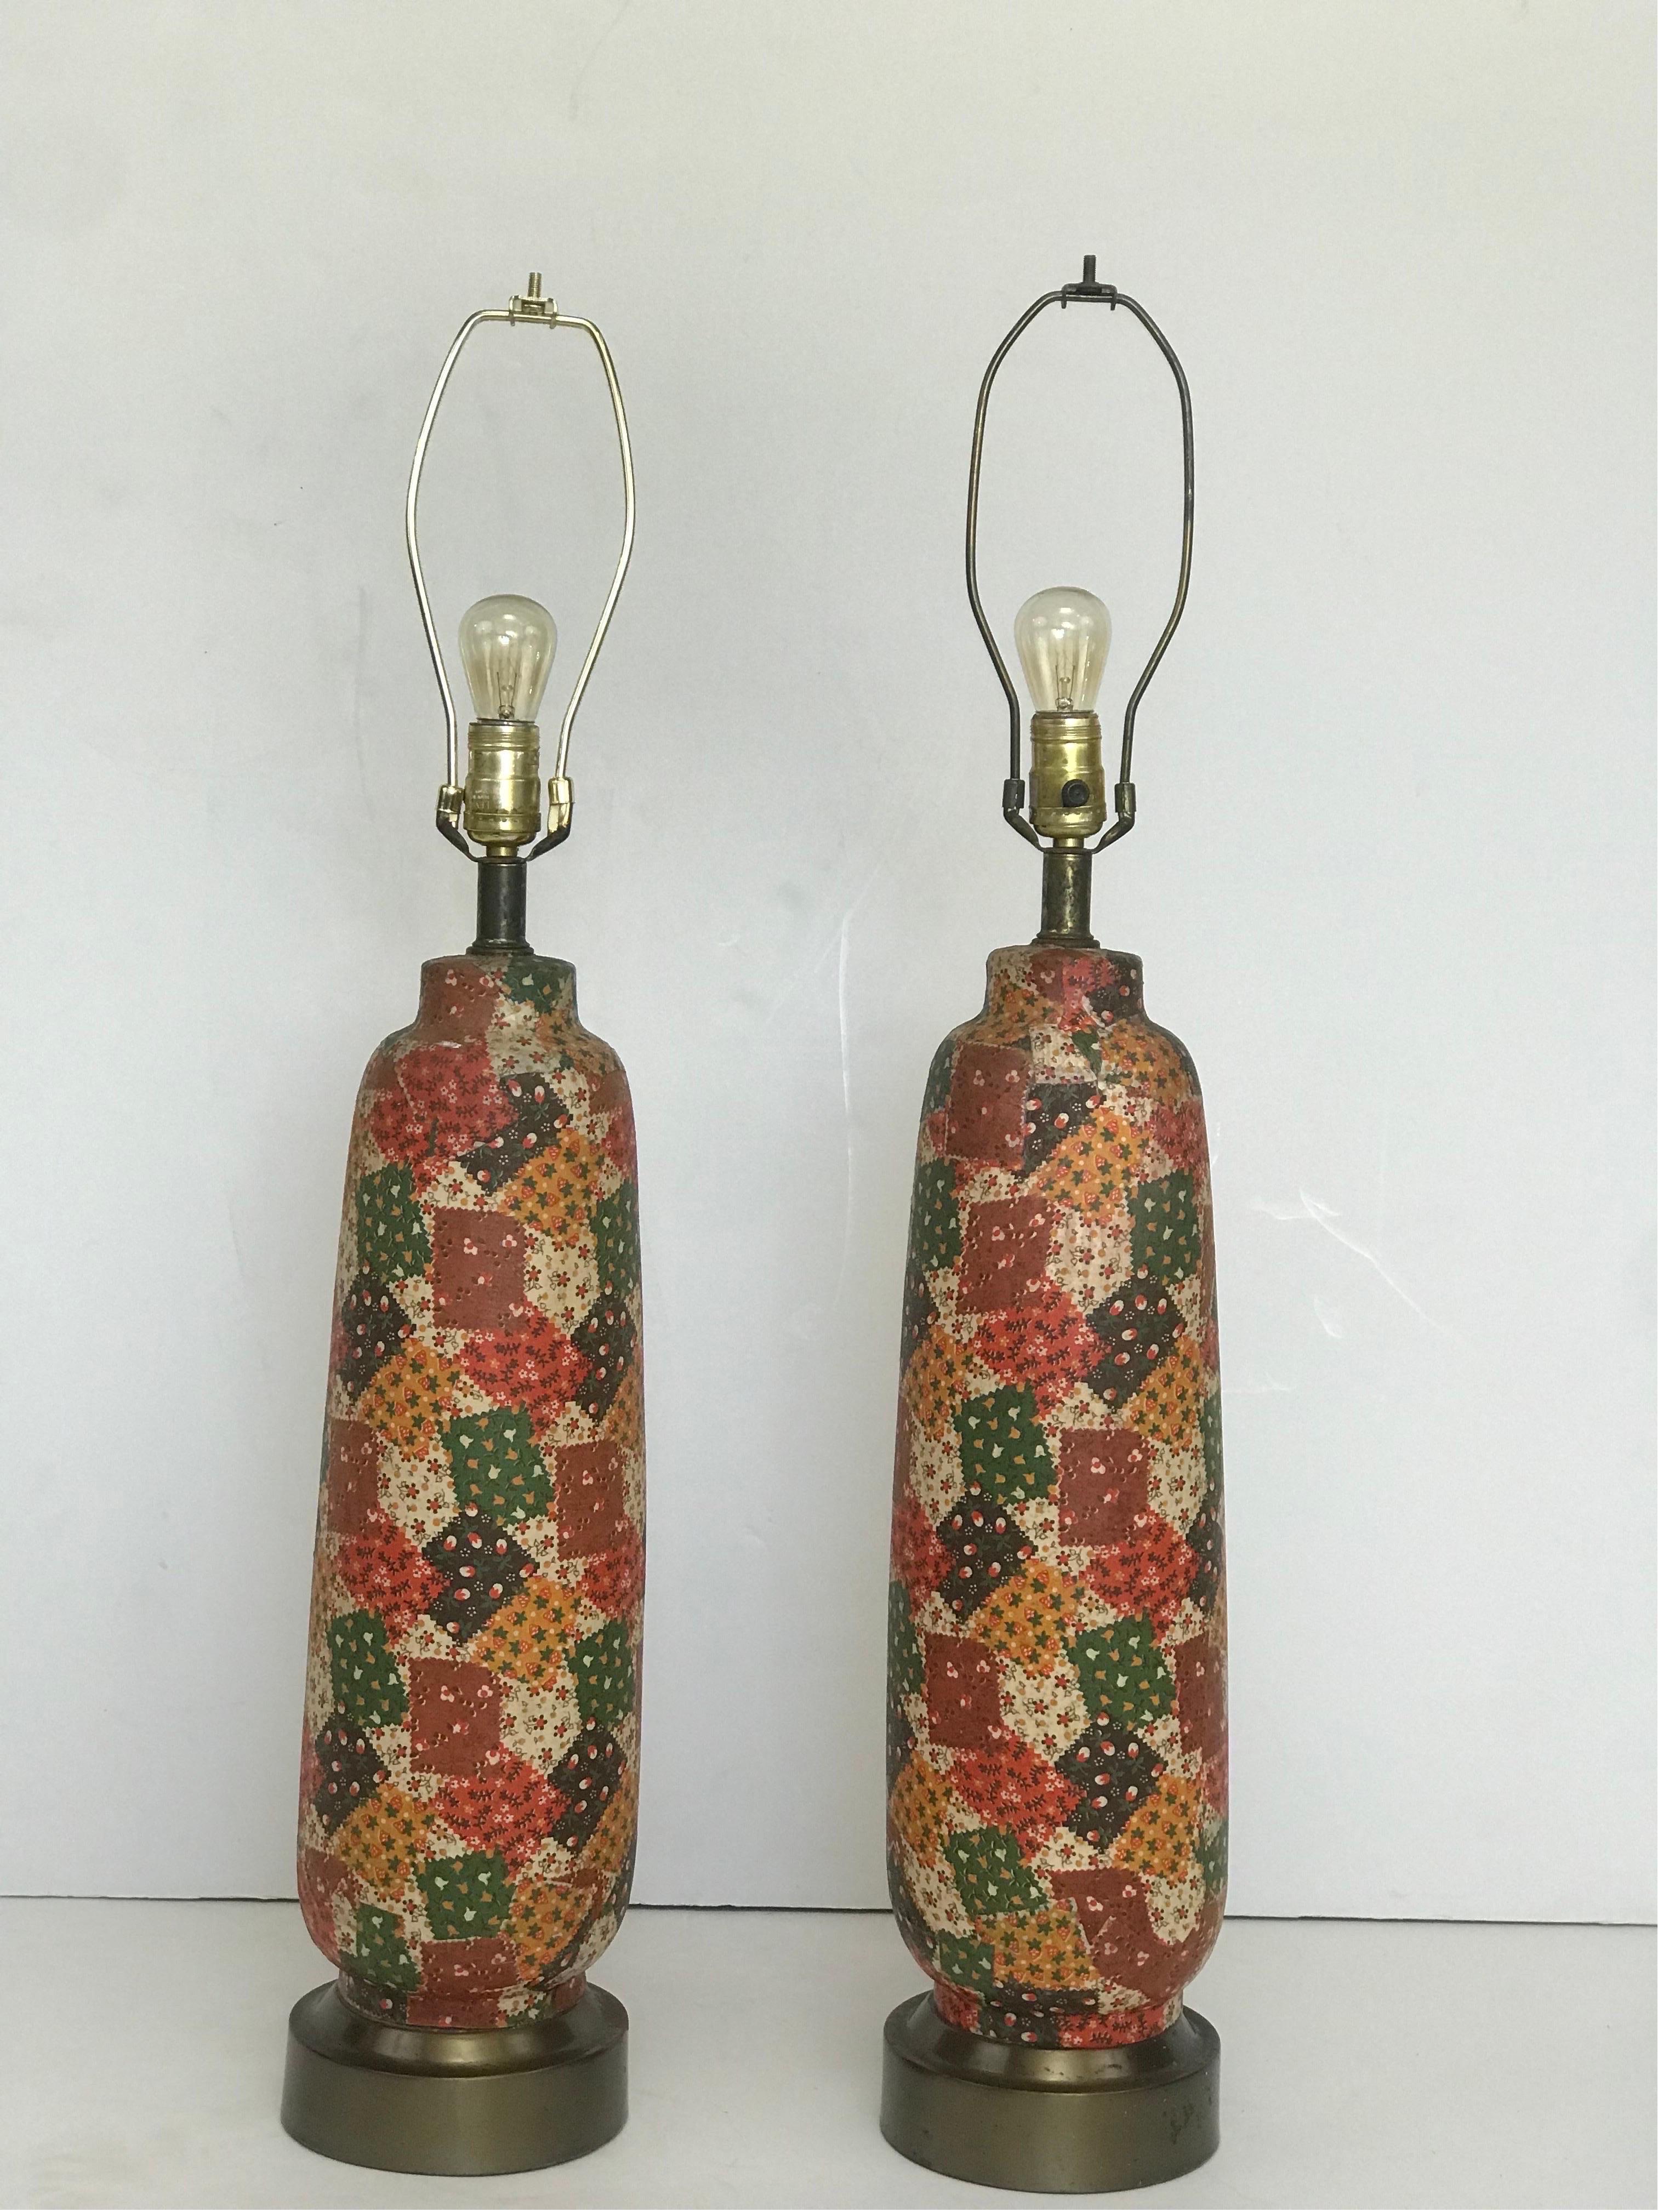 Mid-Century Modern A Pair of 1970’s Spun Metal Table Lamps in a Printed Patchwork Theme Finish  For Sale